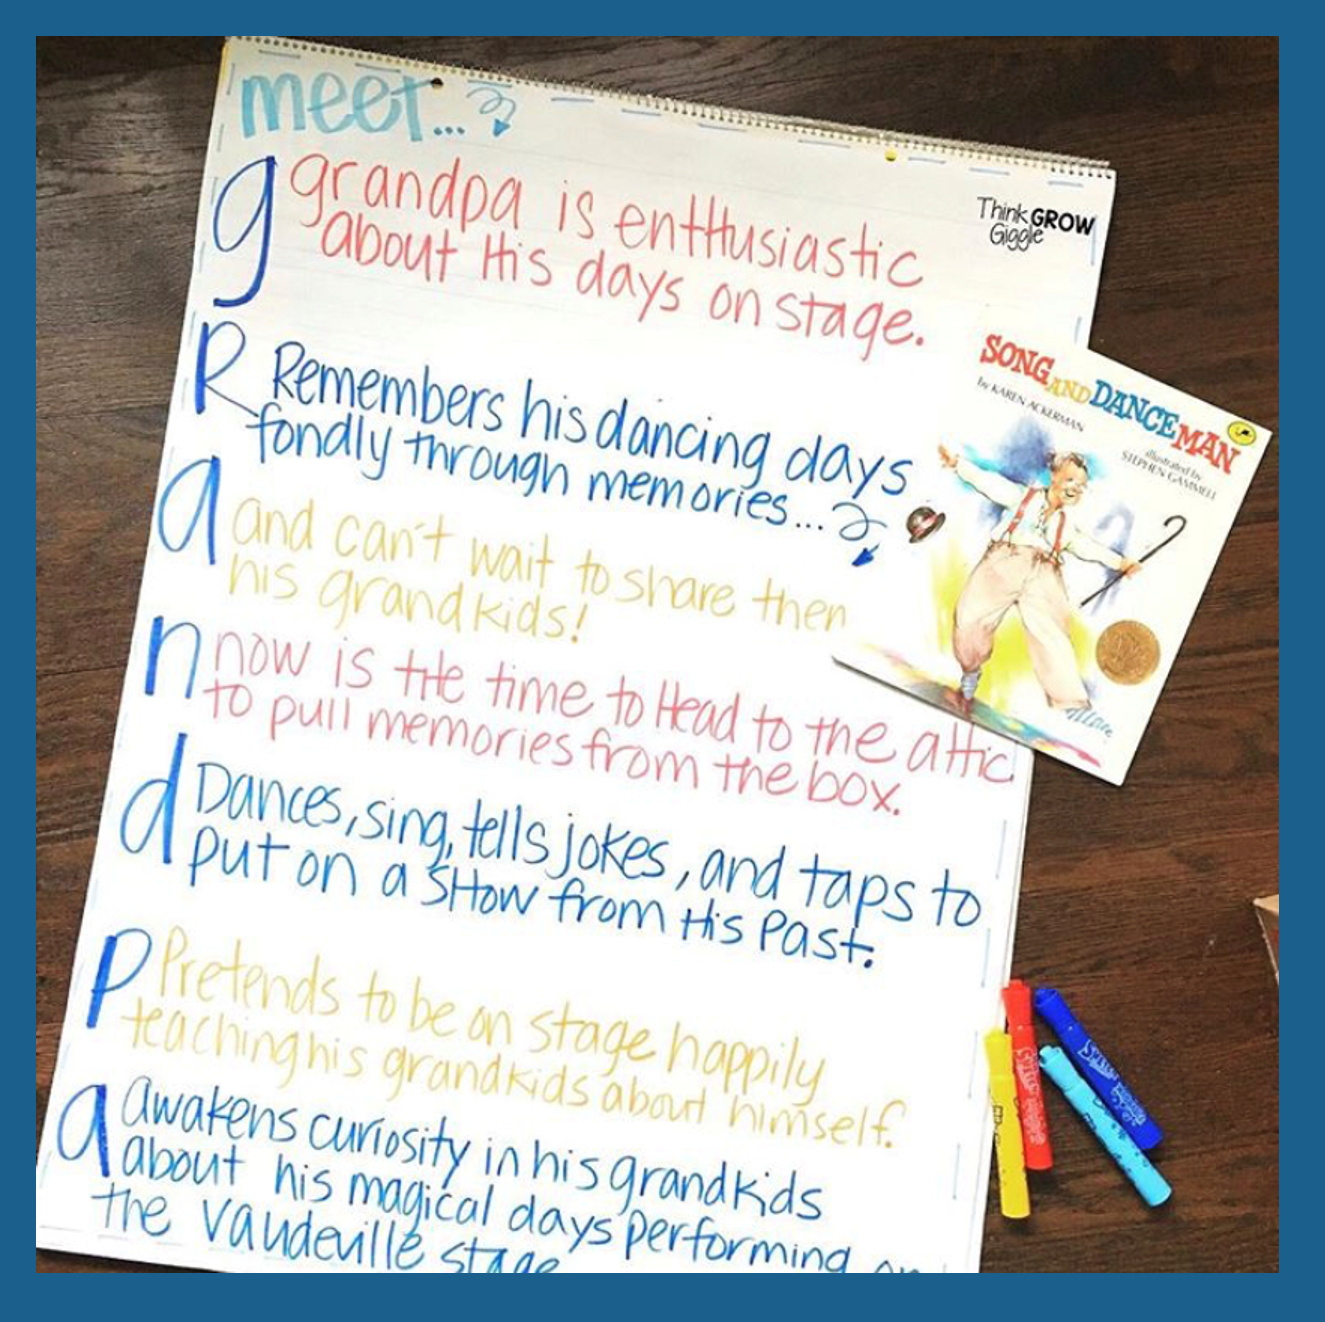 8-acrostic-poem-ideas-to-challenge-upper-elementary-students-think-grow-giggle